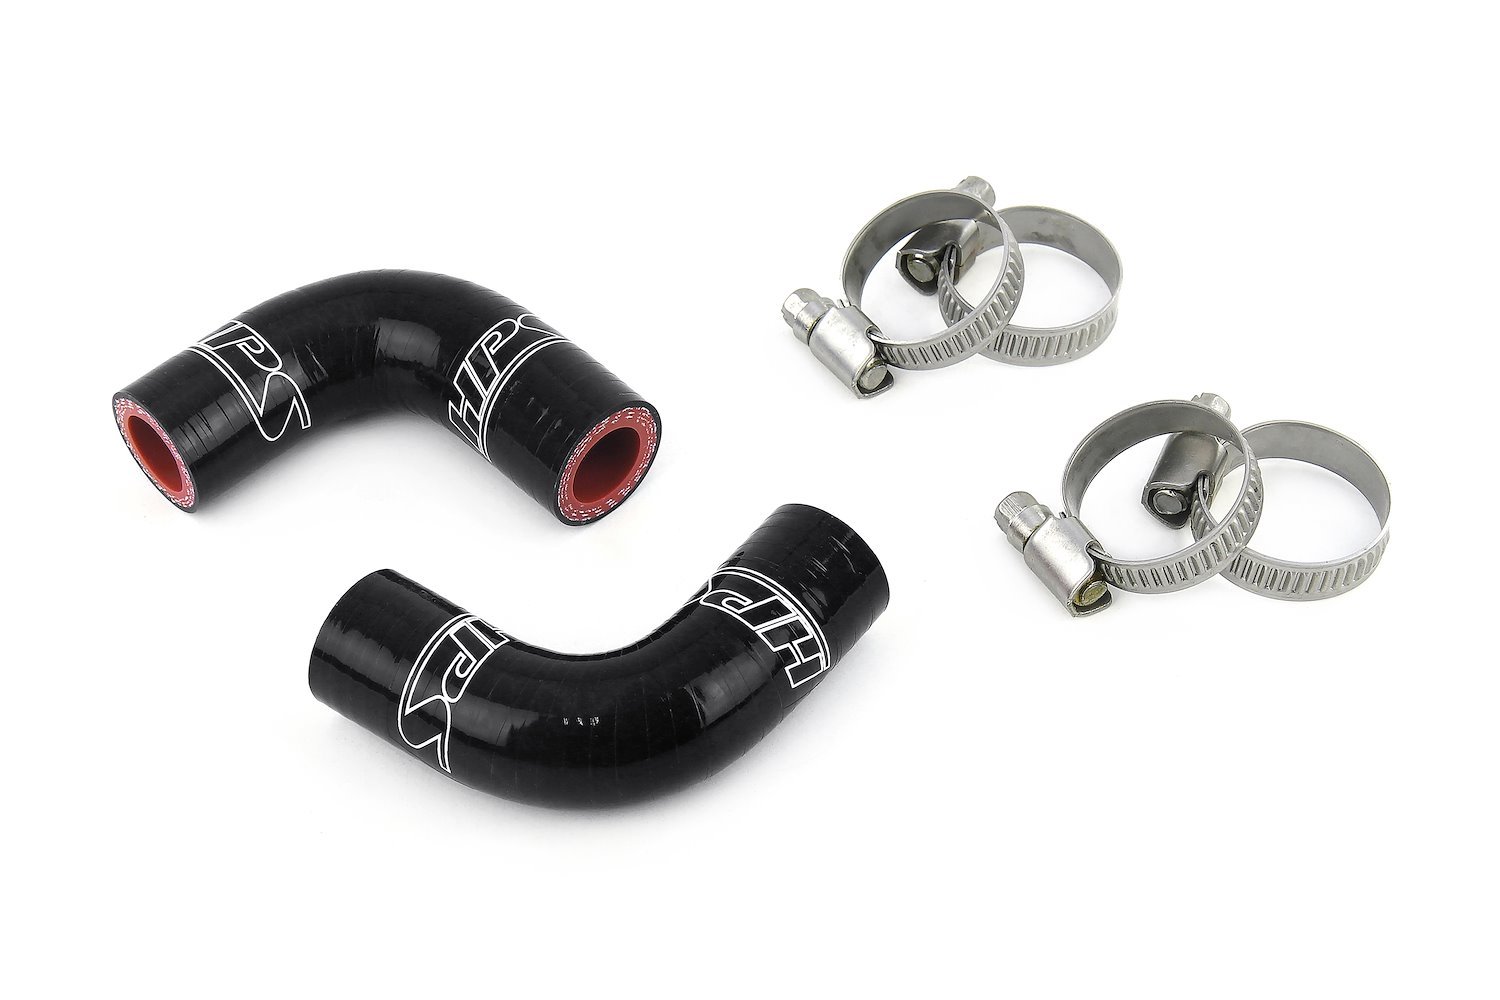 57-2068-BLK Silicone Coolant Hose Kit, 3-Ply Reinforced Silicone, Replaces Rubber Heater & Transmission Coolant Hoses